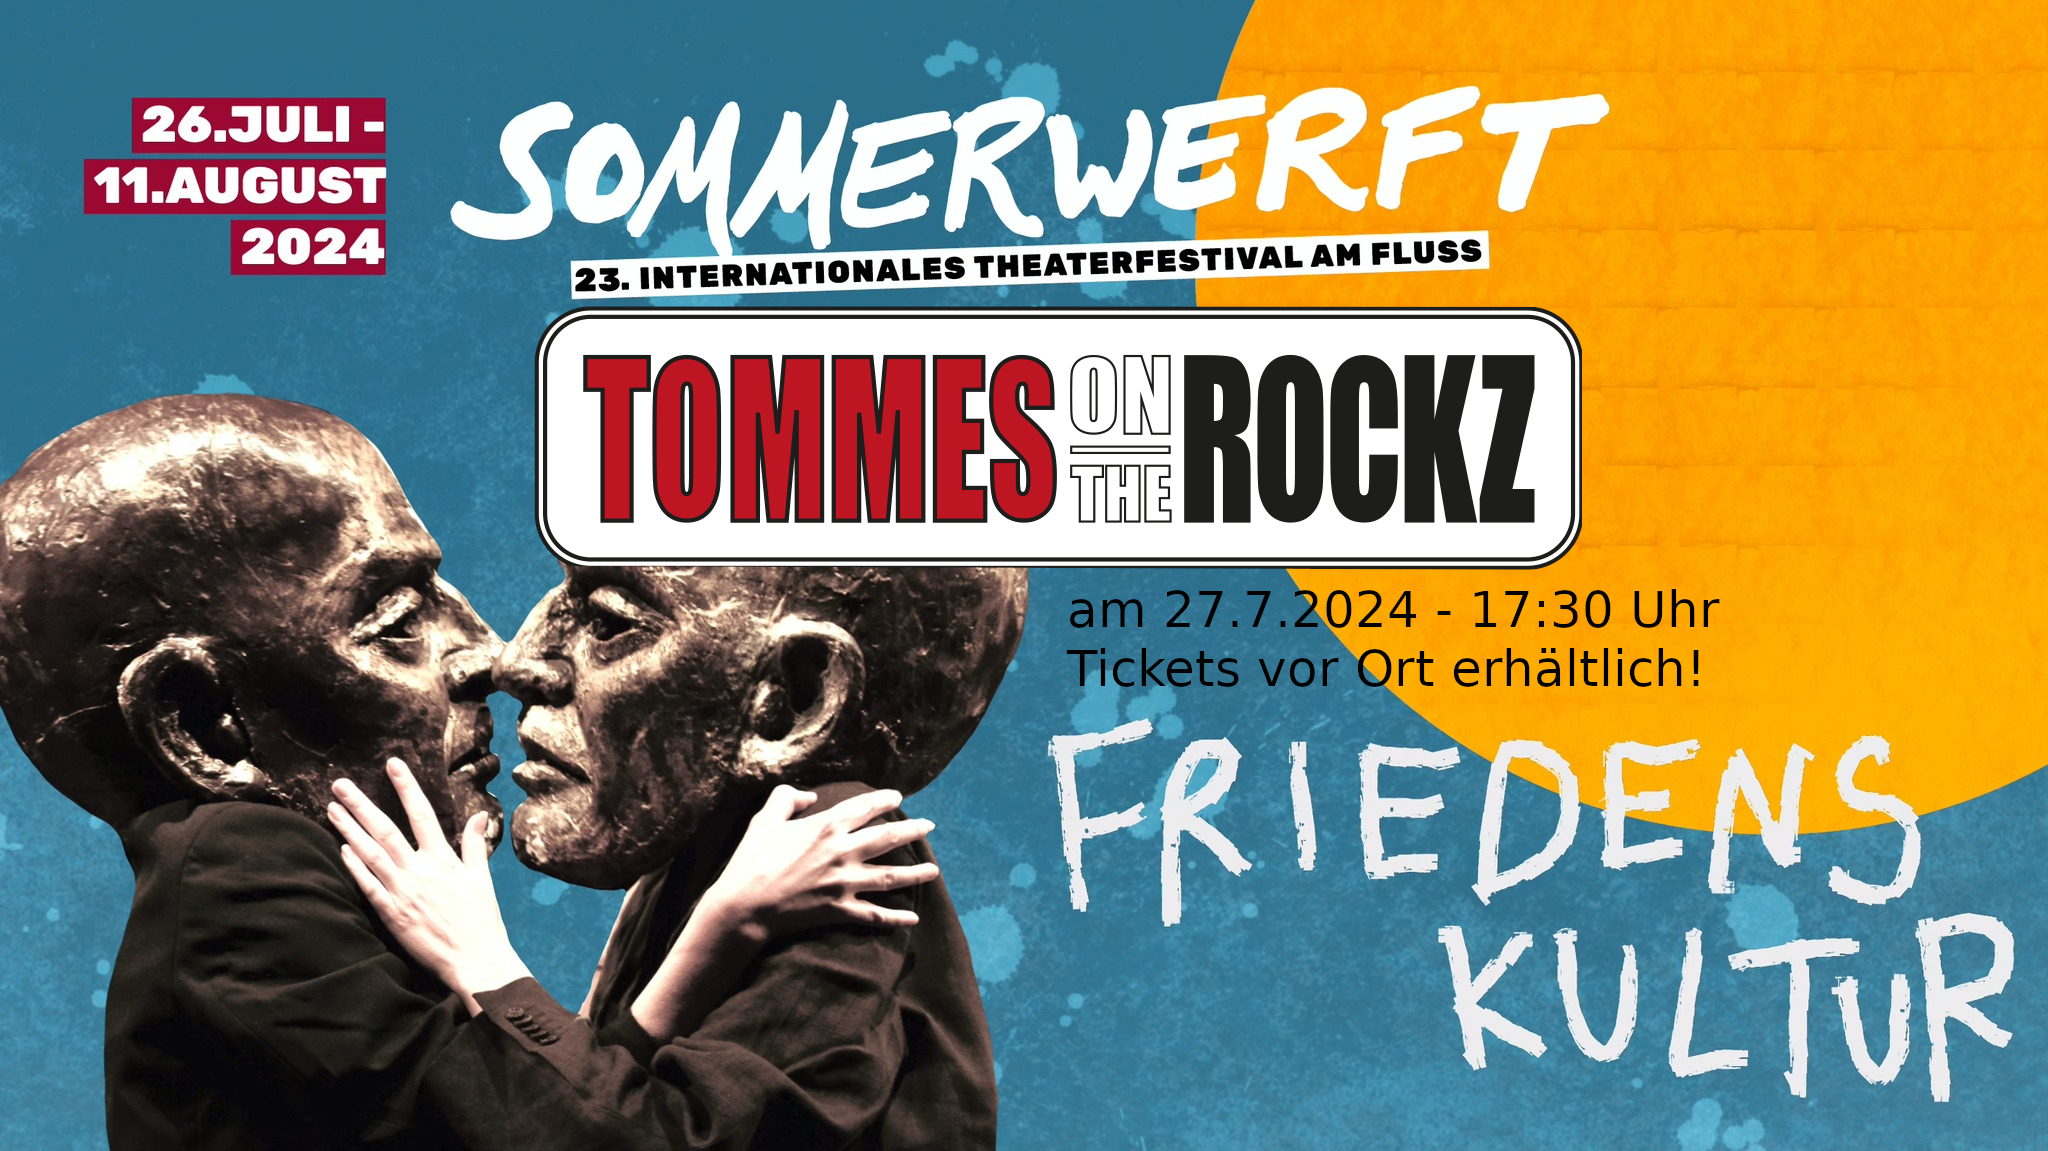 Sommerwerft 2024 Poster TOMMES on the ROCKZ